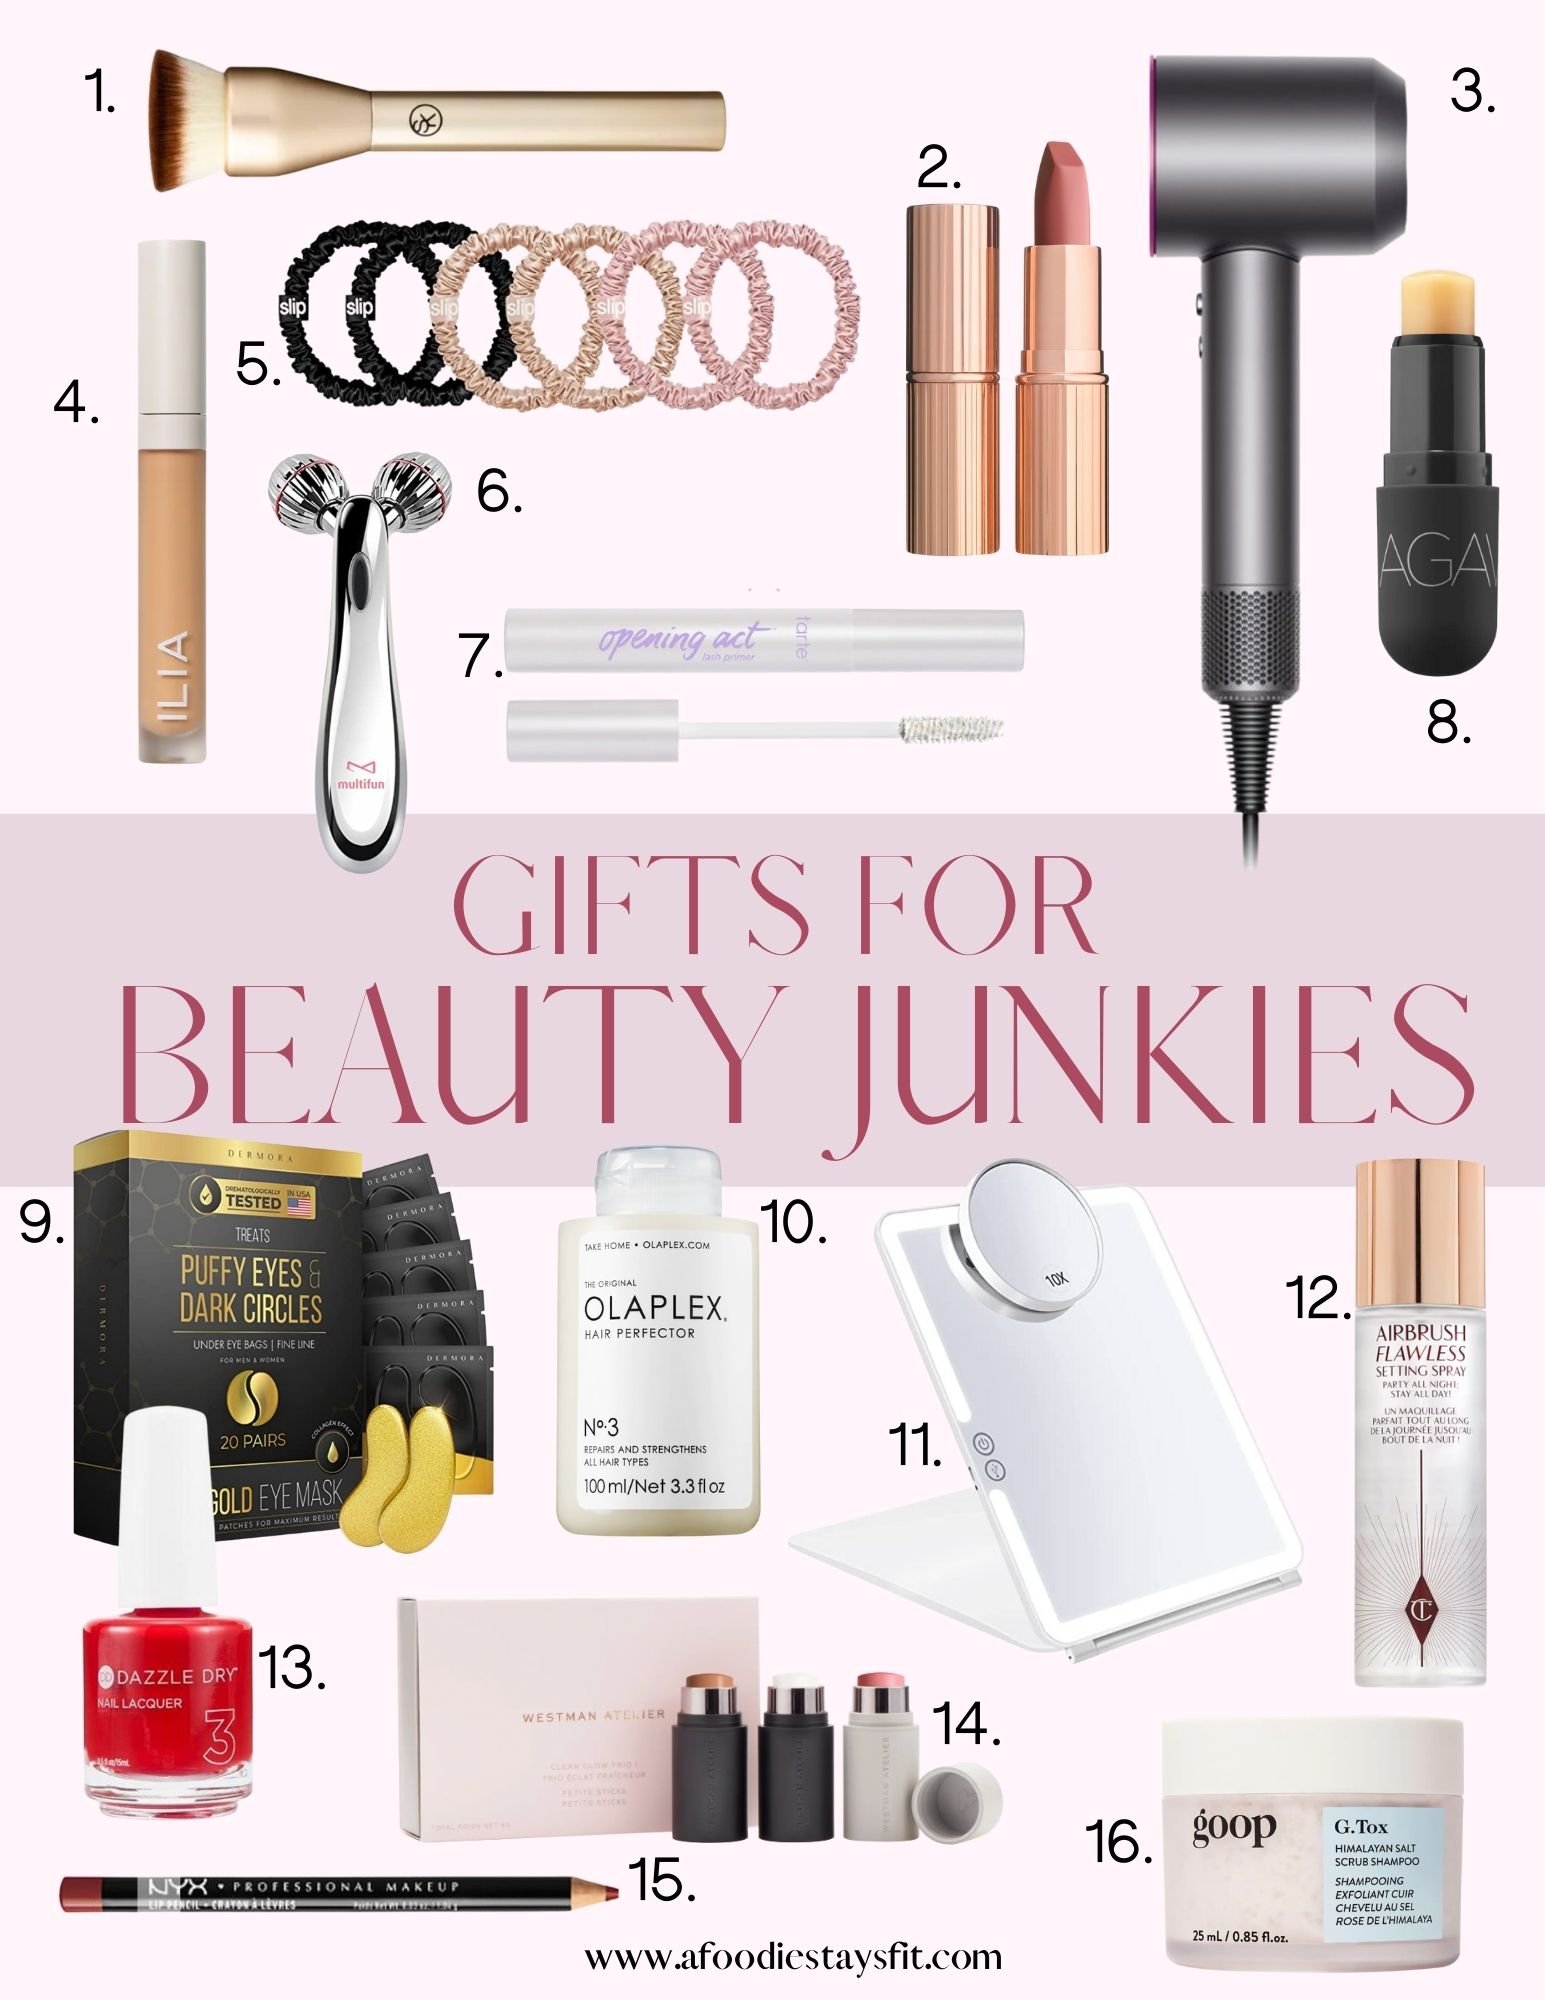 Gifts for beauty junkies - 2021 Gift Guides